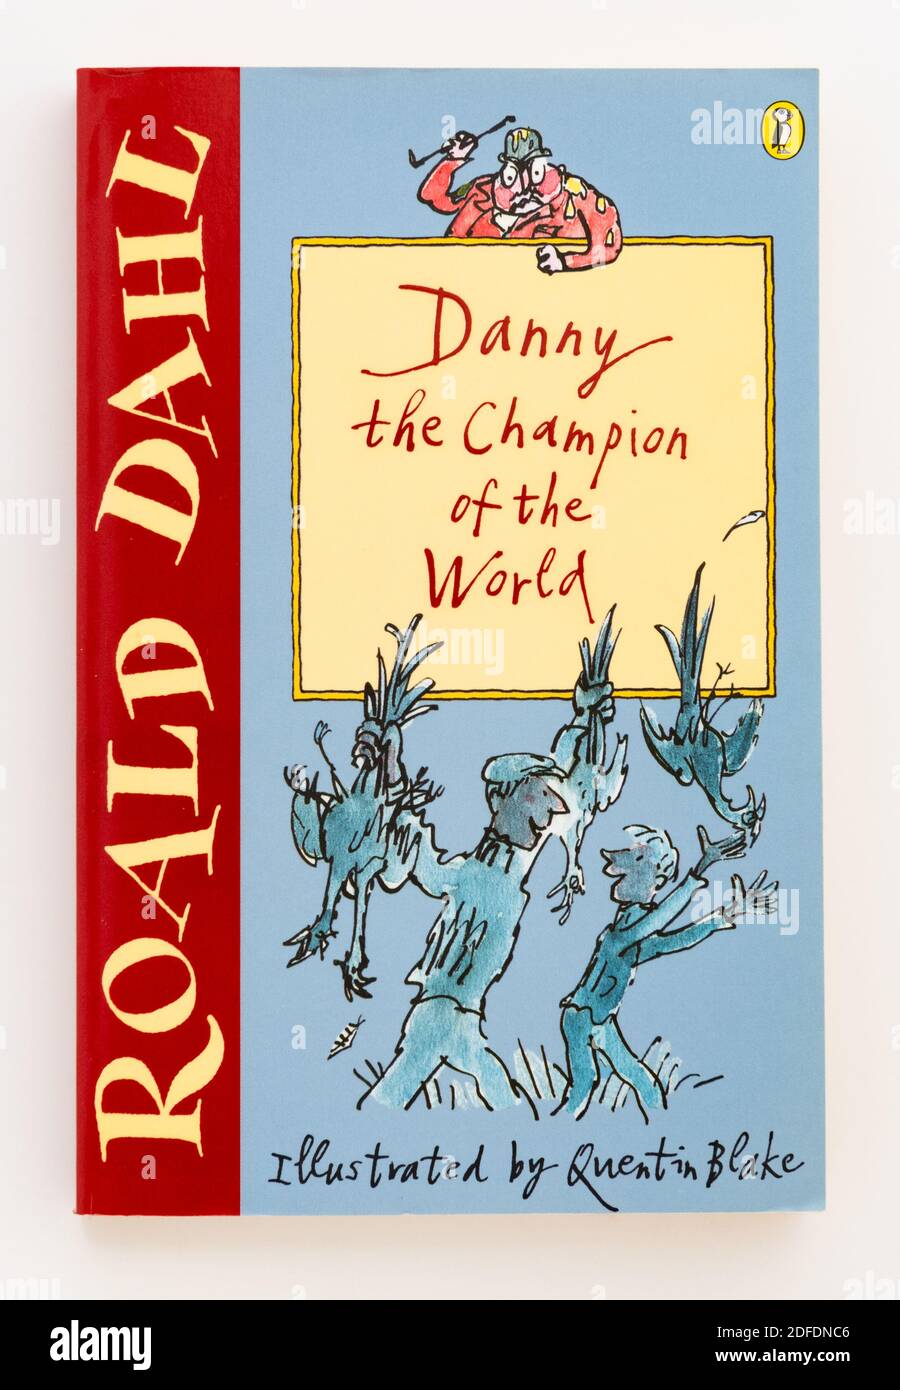 Danny the Champion of the World by Roald Dahl - puffin paperback  illustrated by Quentin Blake Stock Photo - Alamy